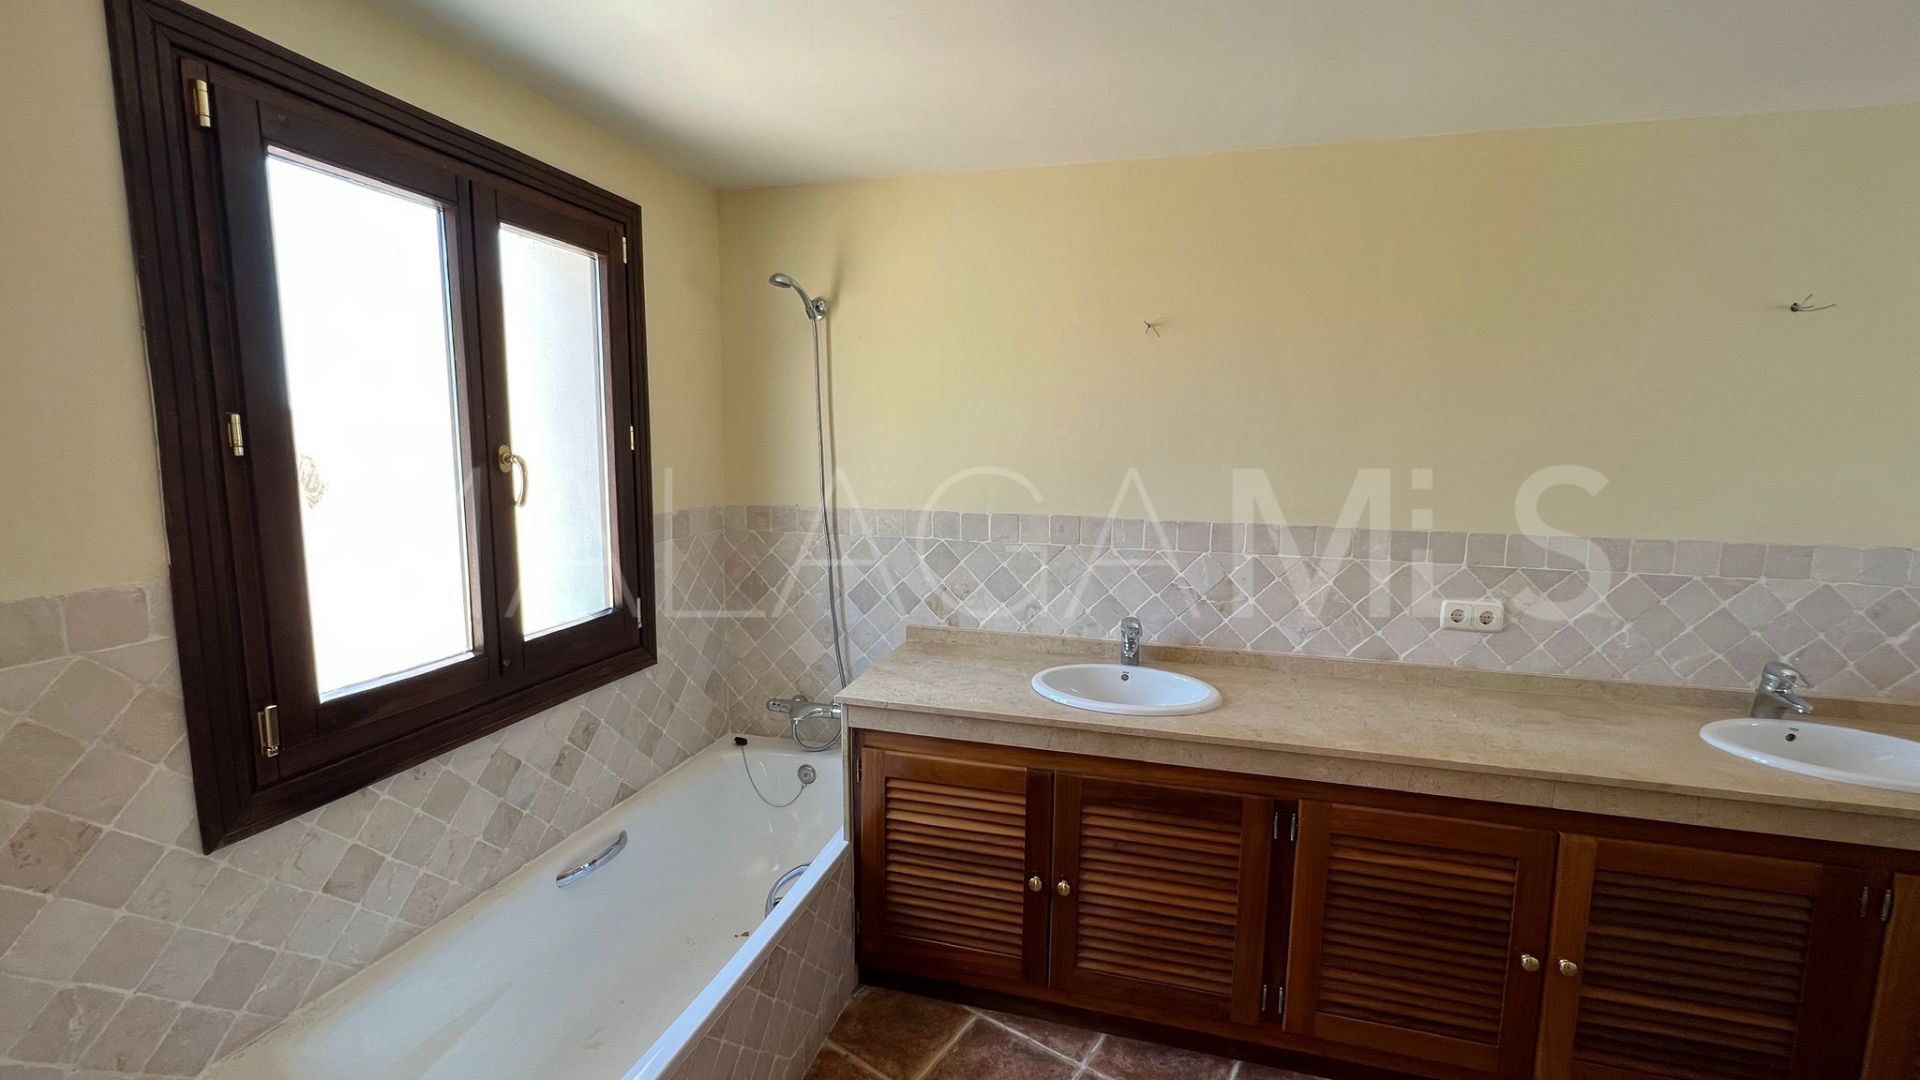 For sale semi detached house in Paraiso Barronal with 4 bedrooms